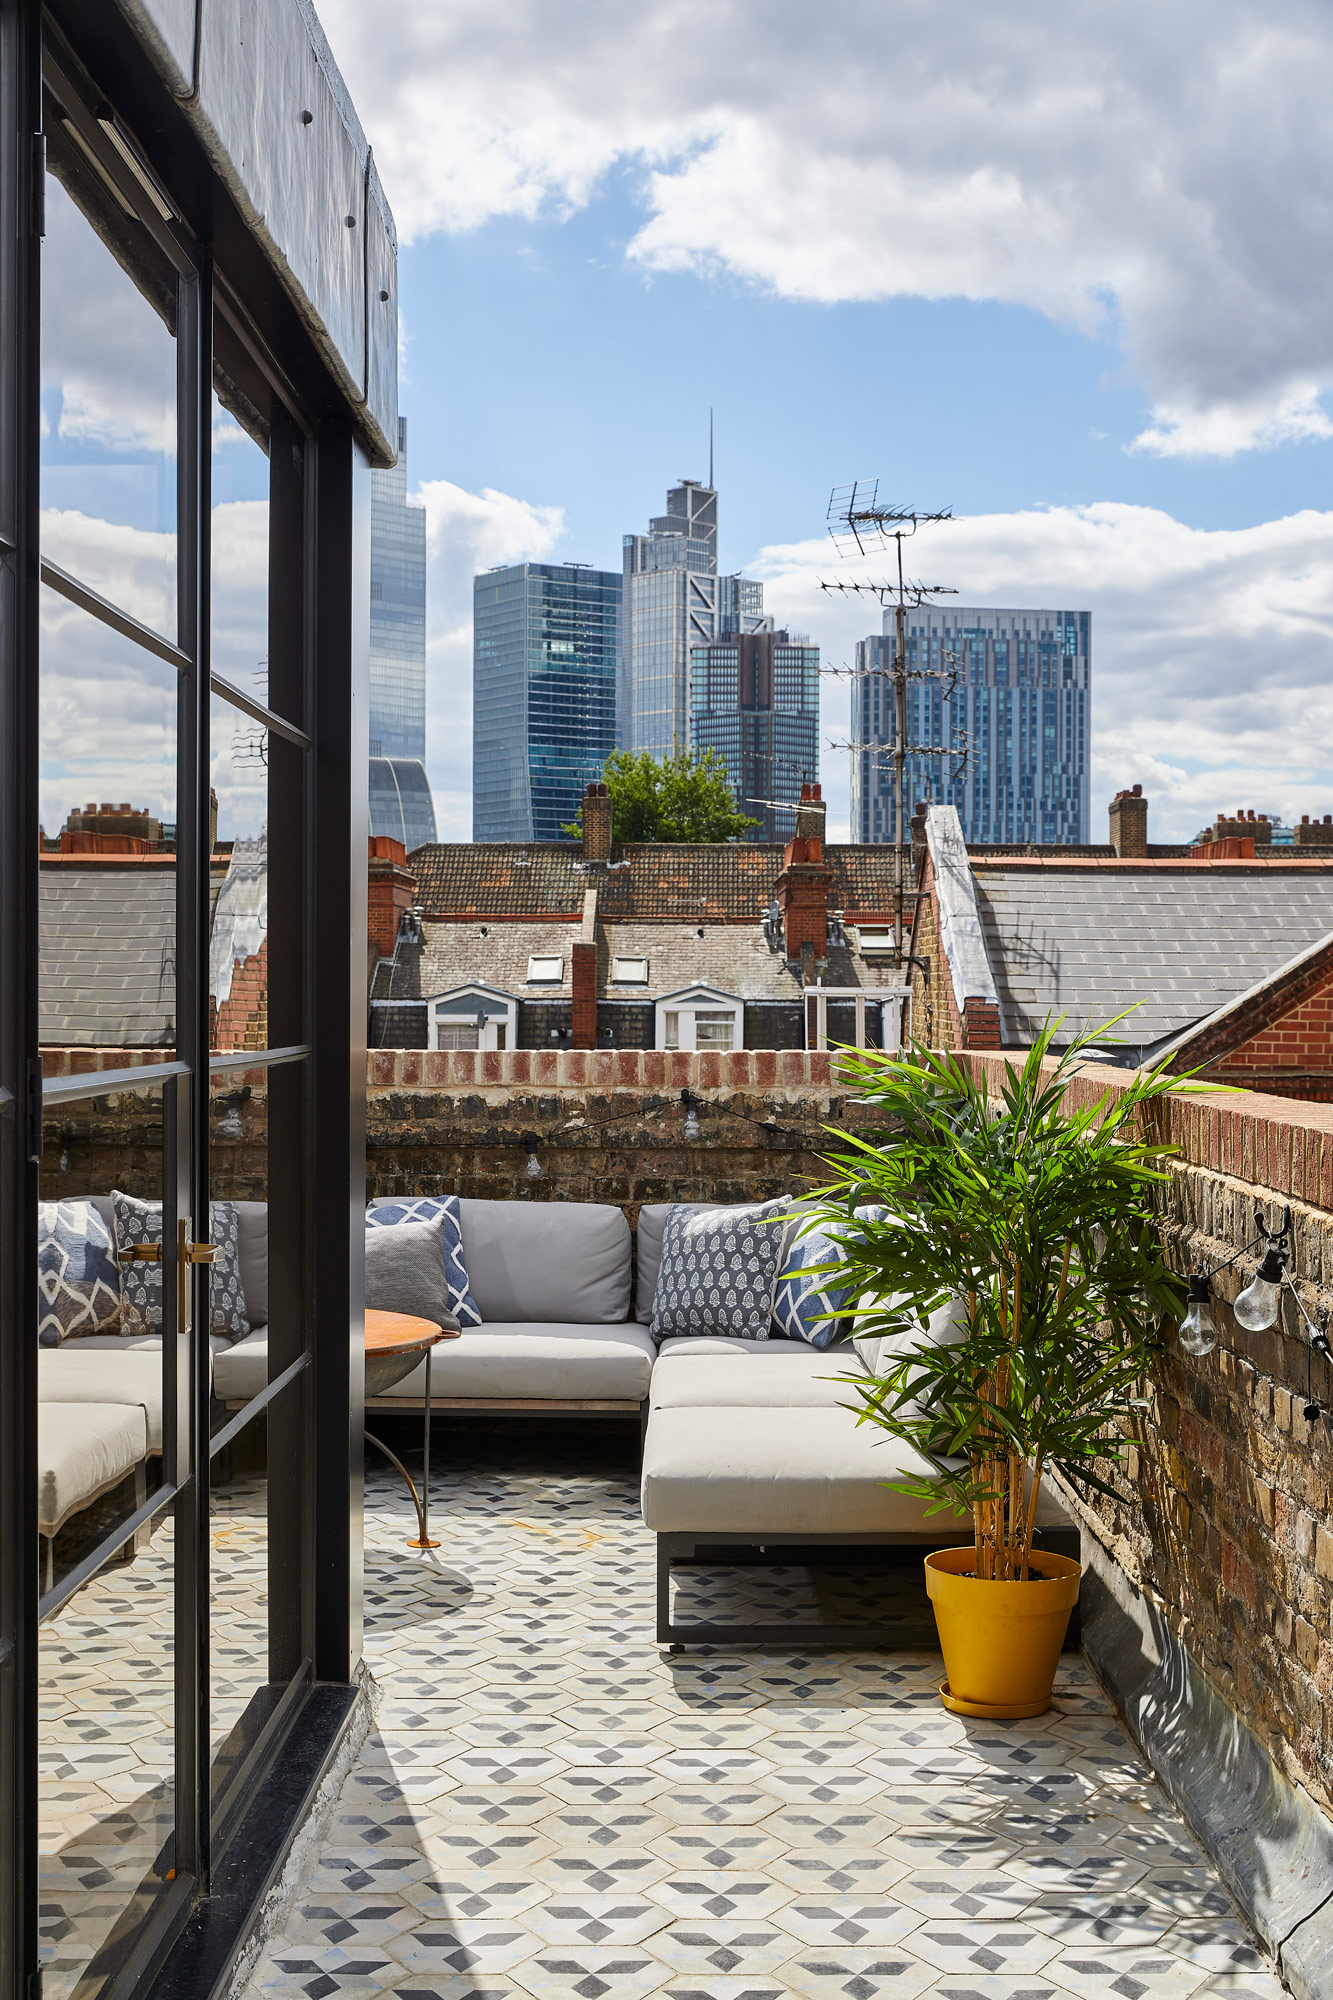 London rooftop apartment with upholstered outdoor furniture and reclaimed tiled patio